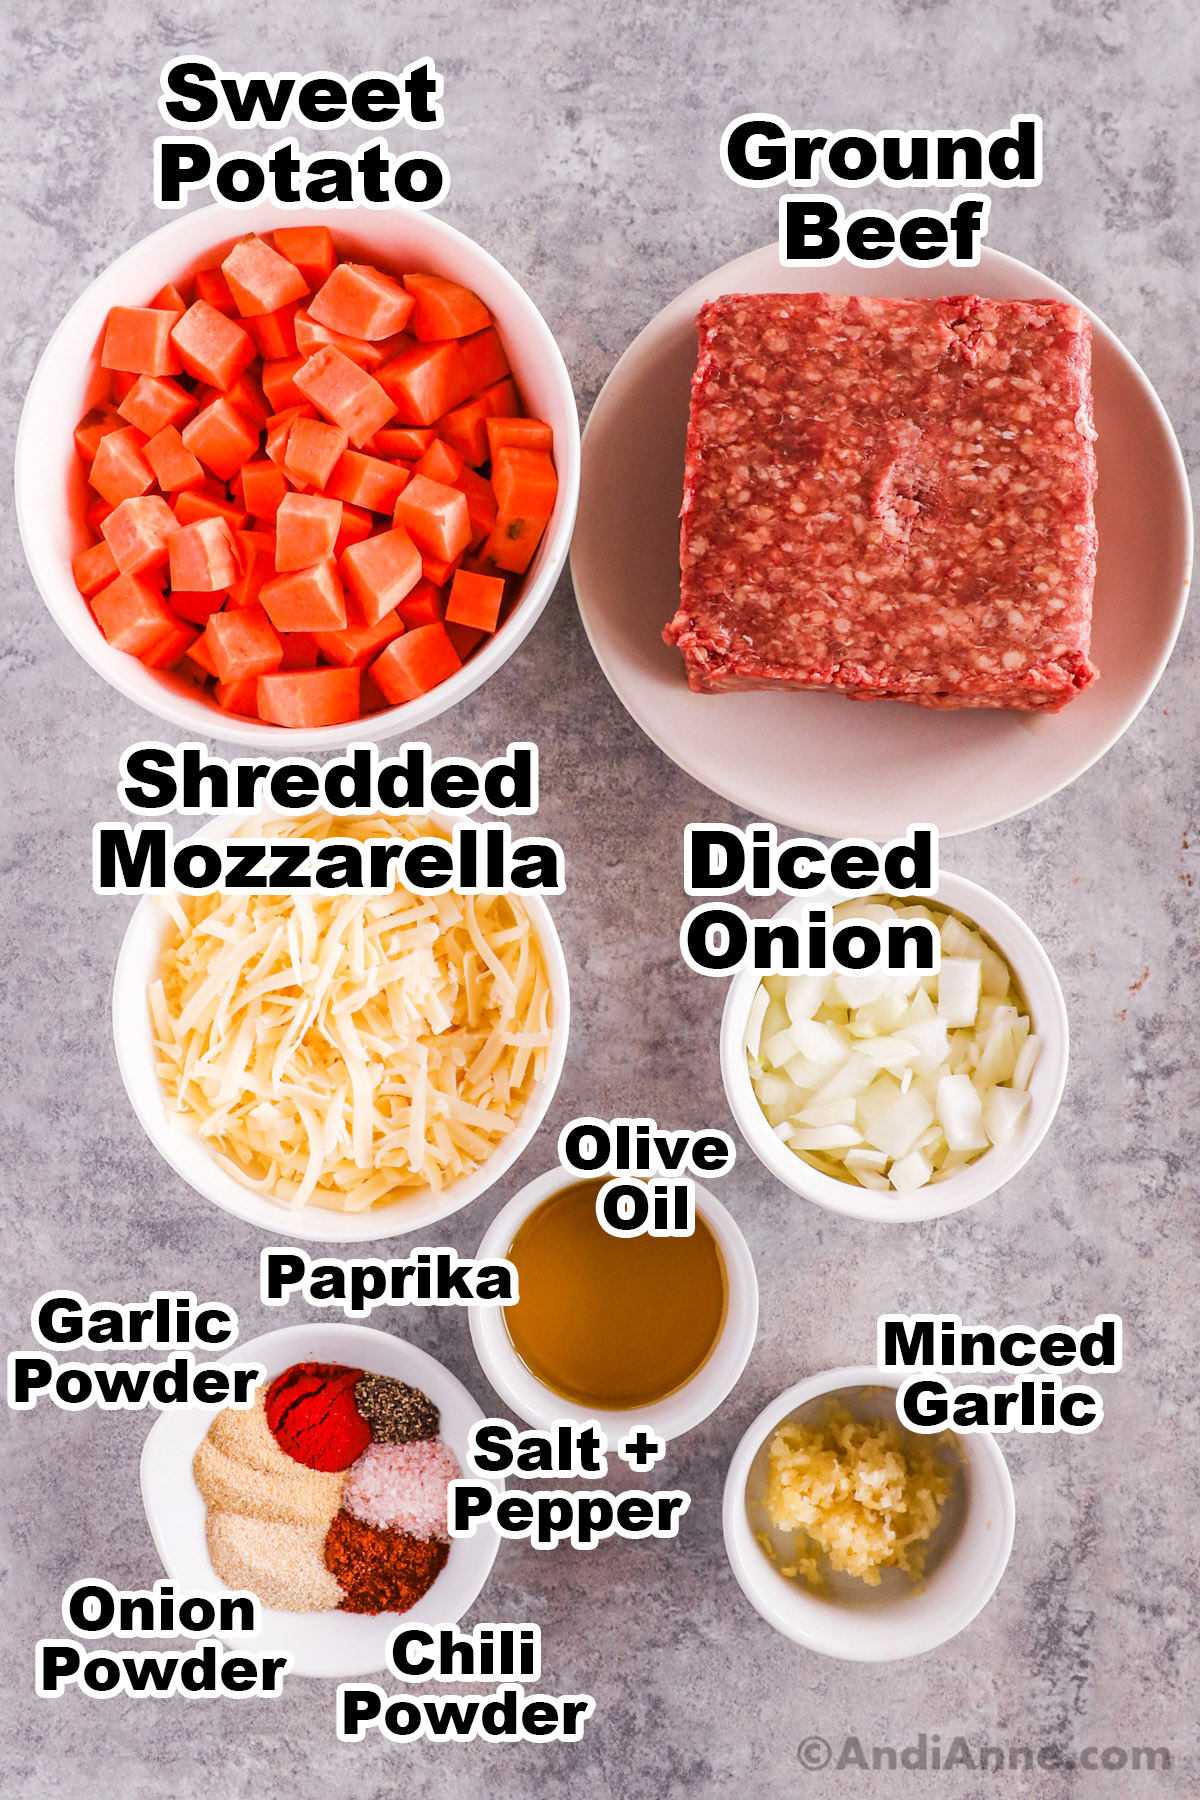 Recipe ingredients including chopped sweet potato, raw ground beef, shredded mozzarella cheese, diced onion, olive oil, minced garlic and spices.